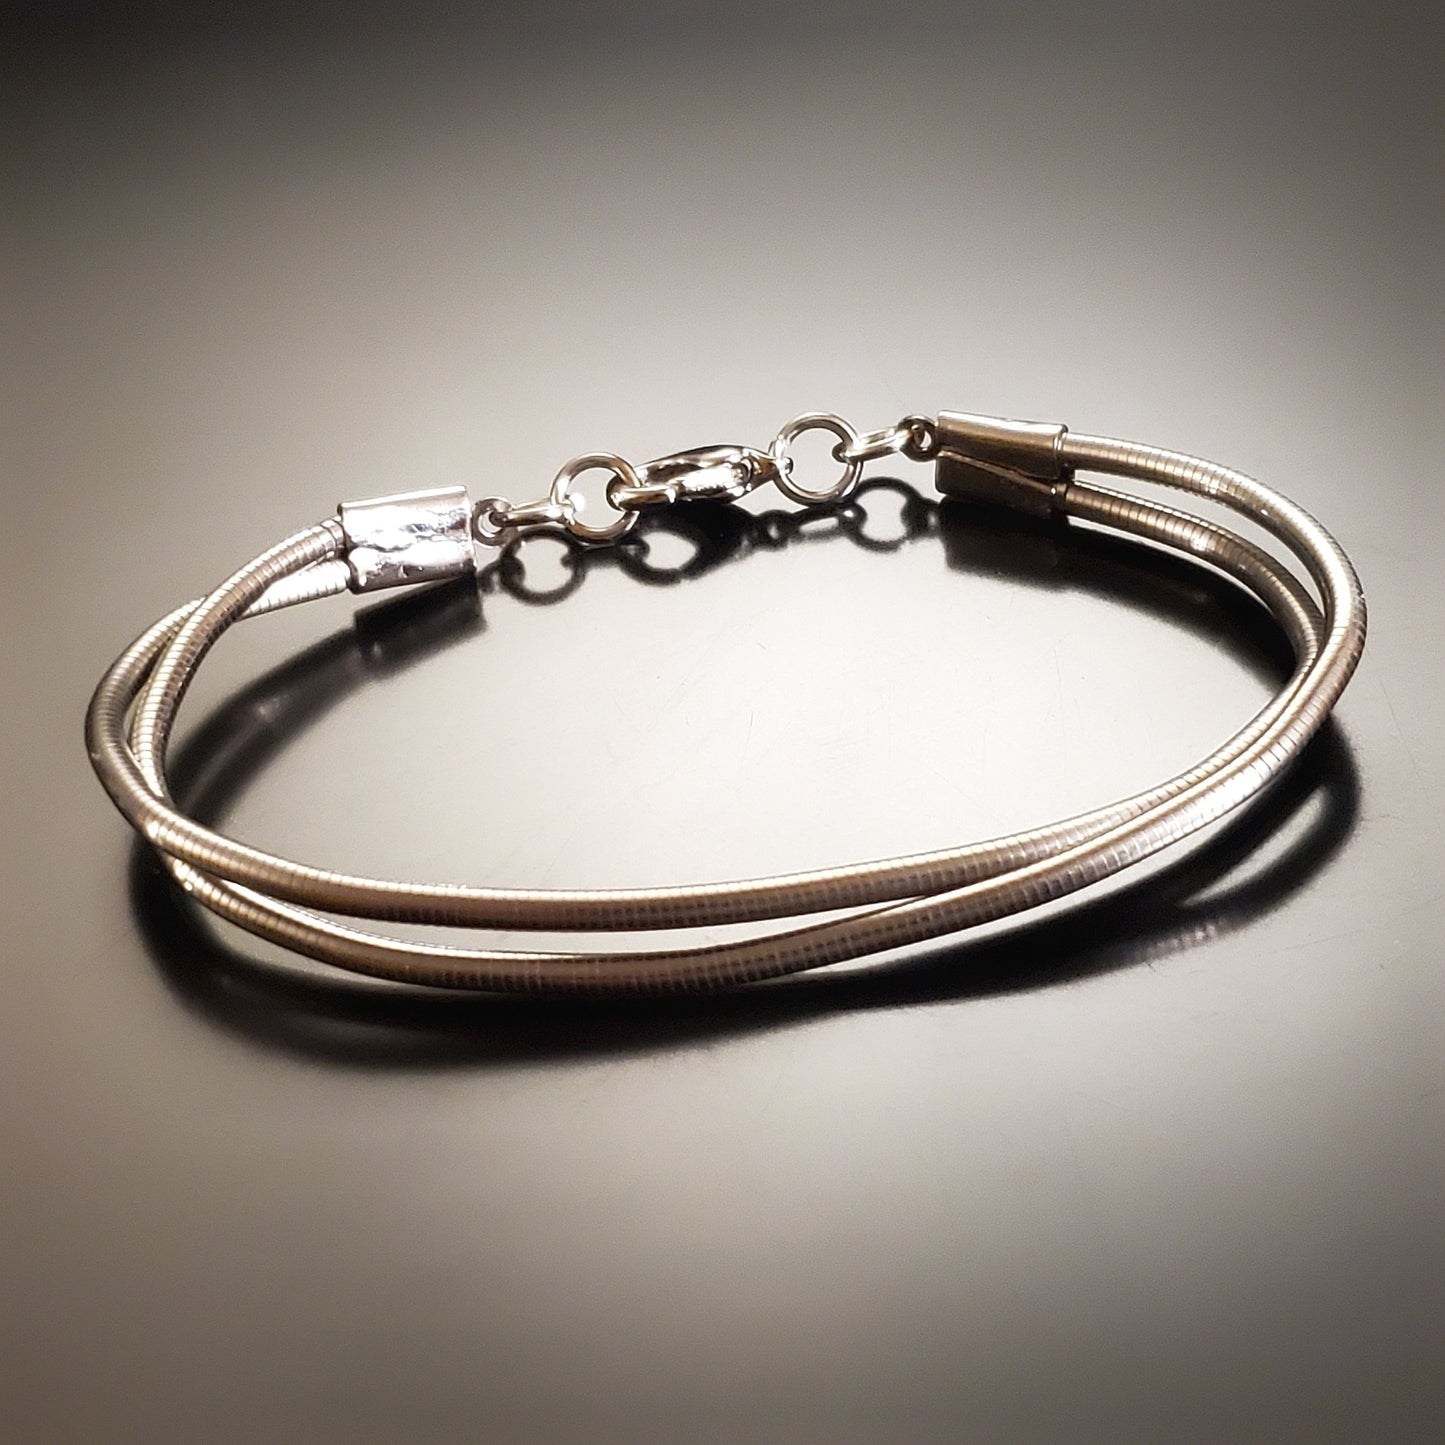 silver coloured clasp style bracelet made from upcycled upright bass strings